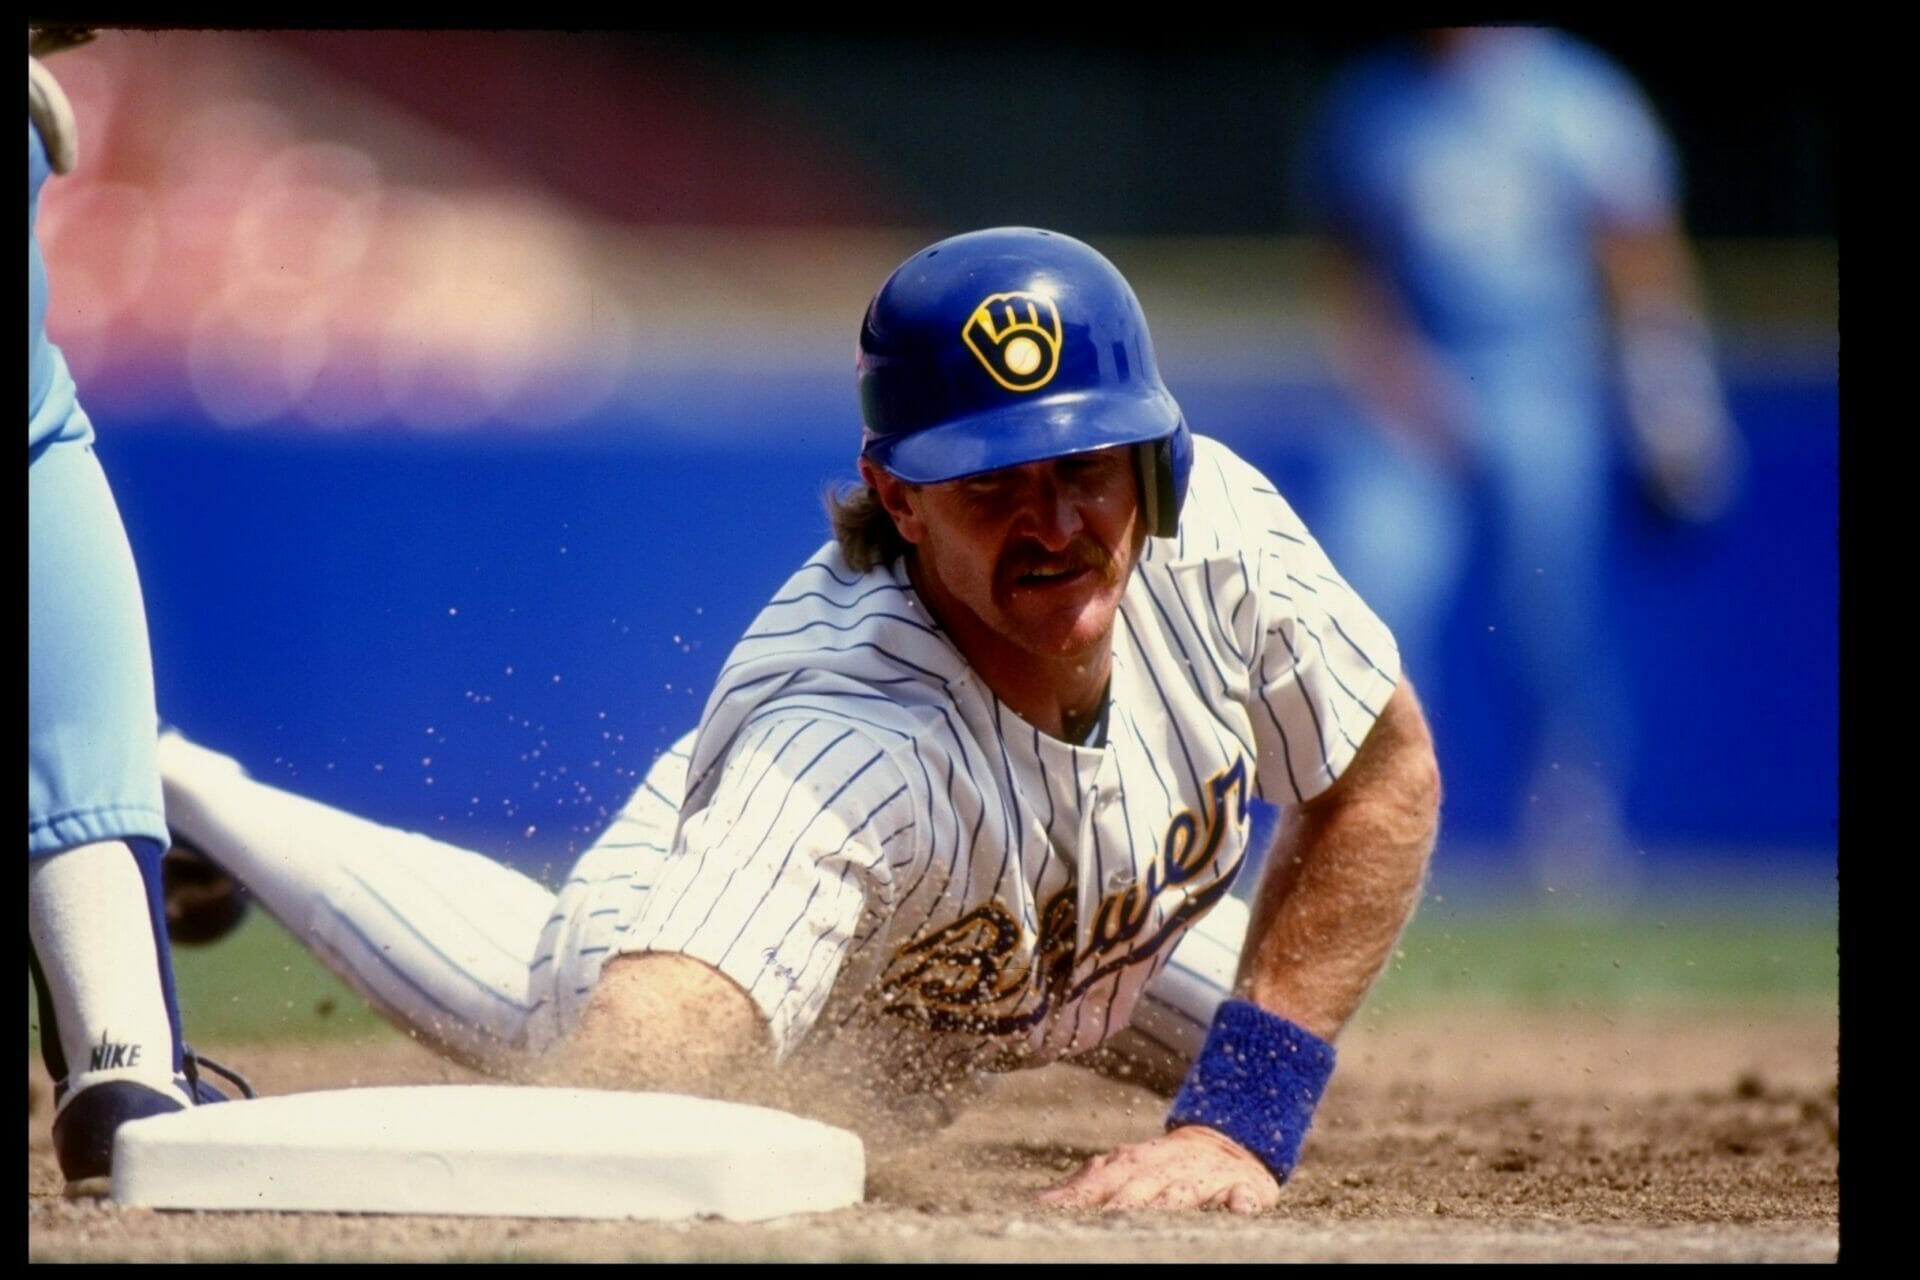 Brewers: All-Time Best Players To Wear Jersey Nos. 11-15